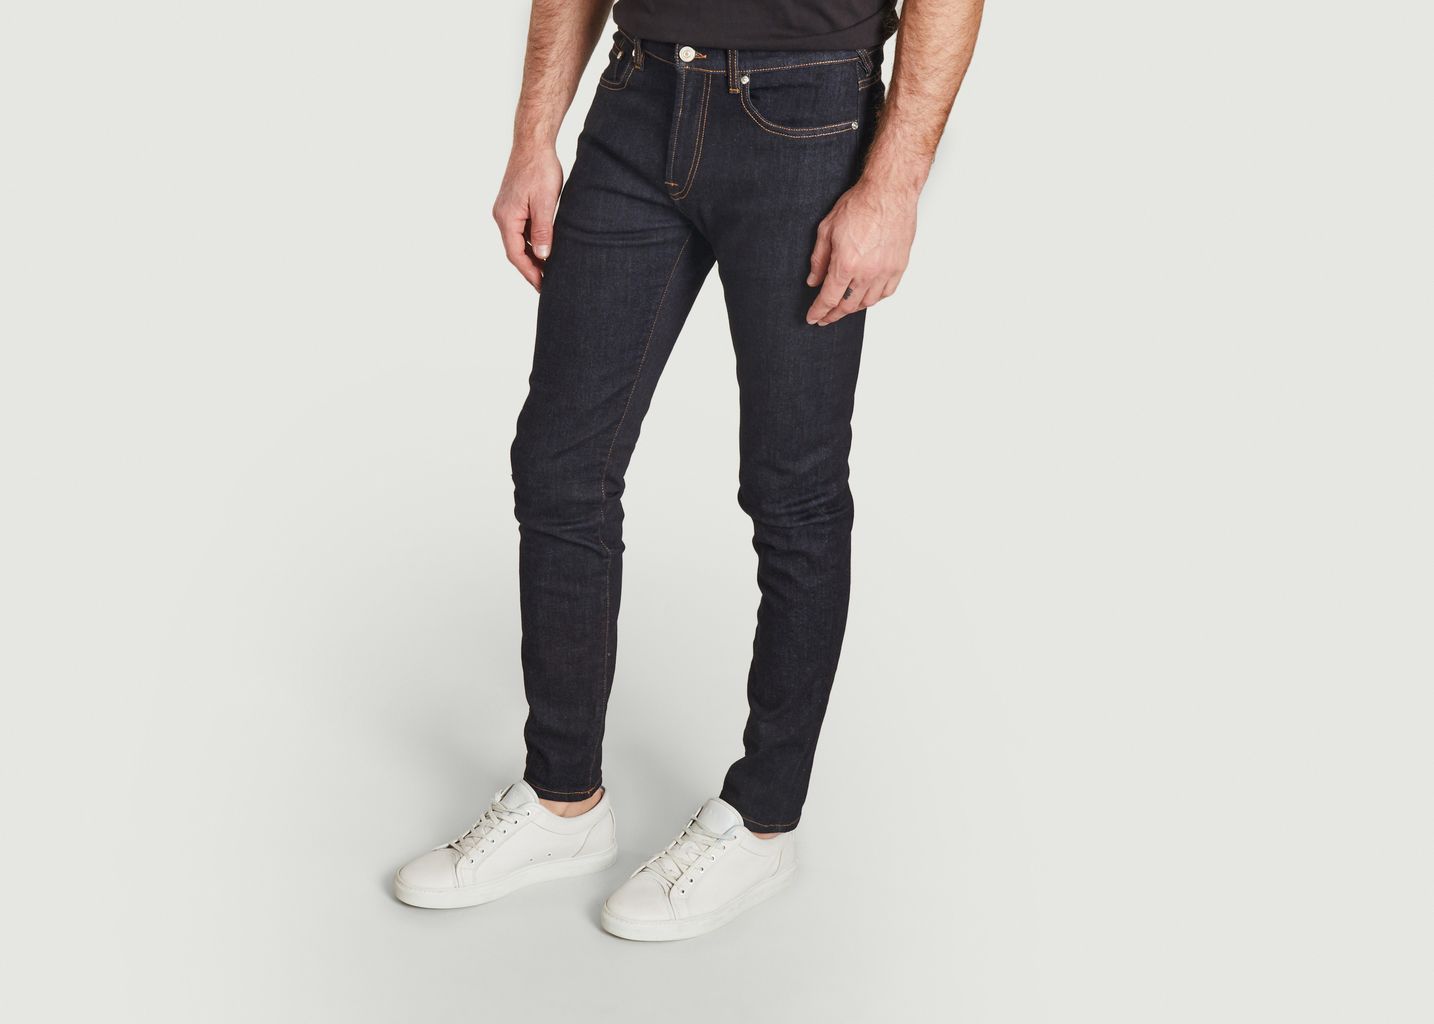 Brut jeans - PS by PAUL SMITH